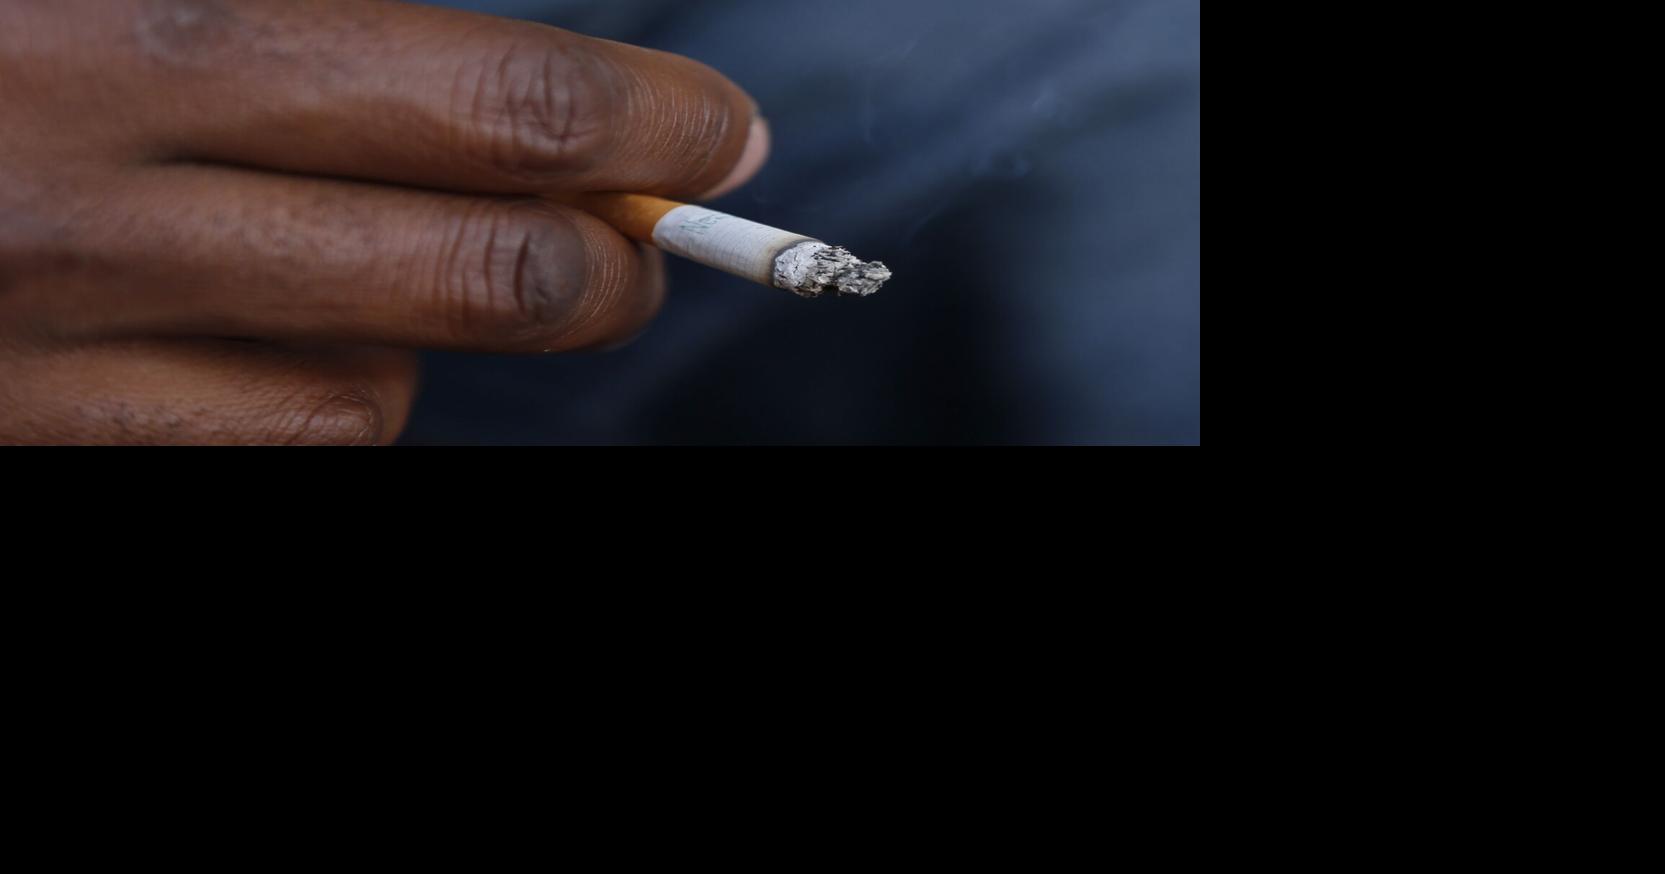 Delaware Senate passes bill banning smoking in a vehicle with a minor, changes age restriction